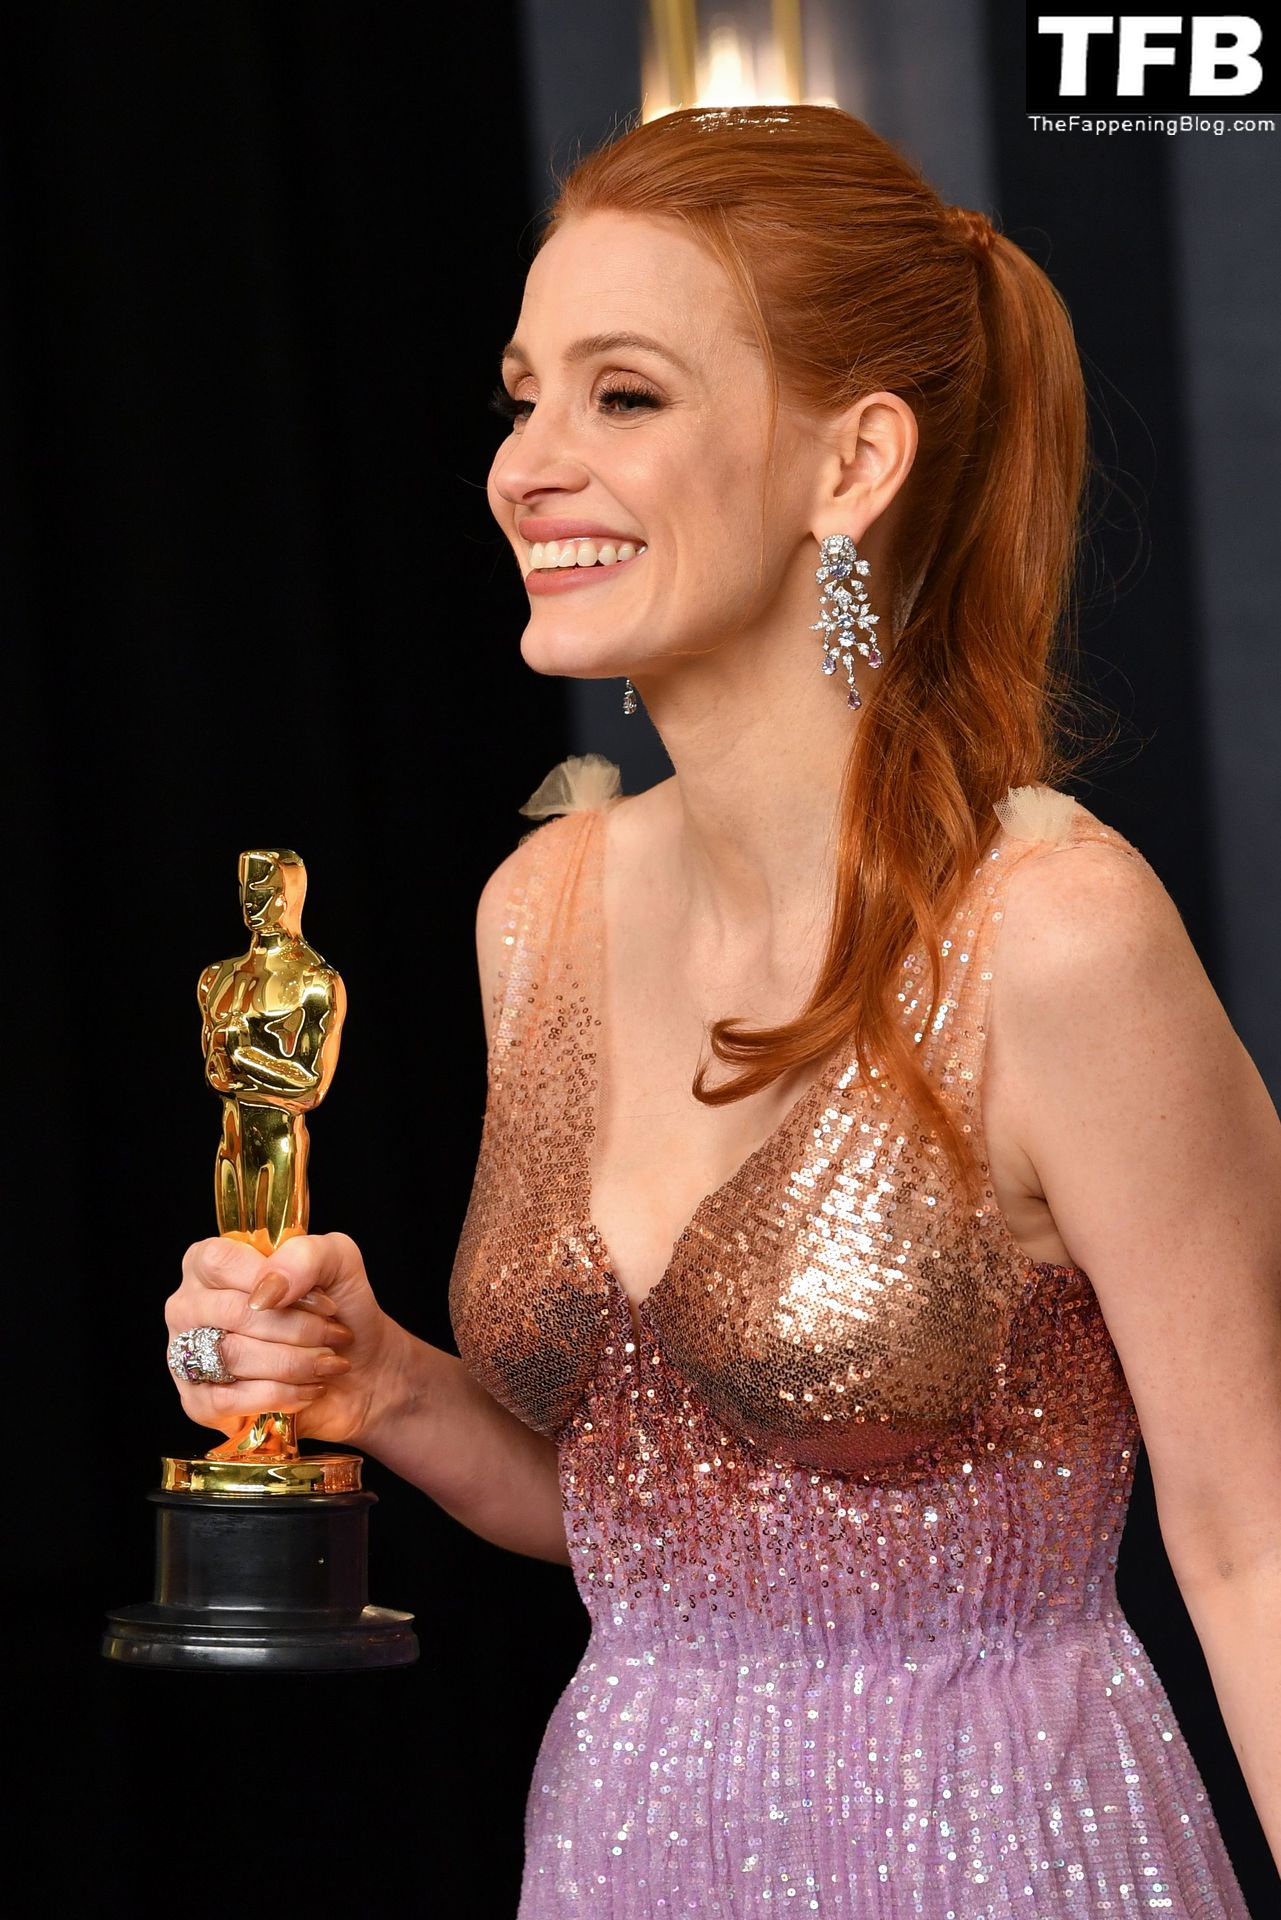 Jessica-Chastain-Sexy-The-Fappening-Blog-4-2.jpg